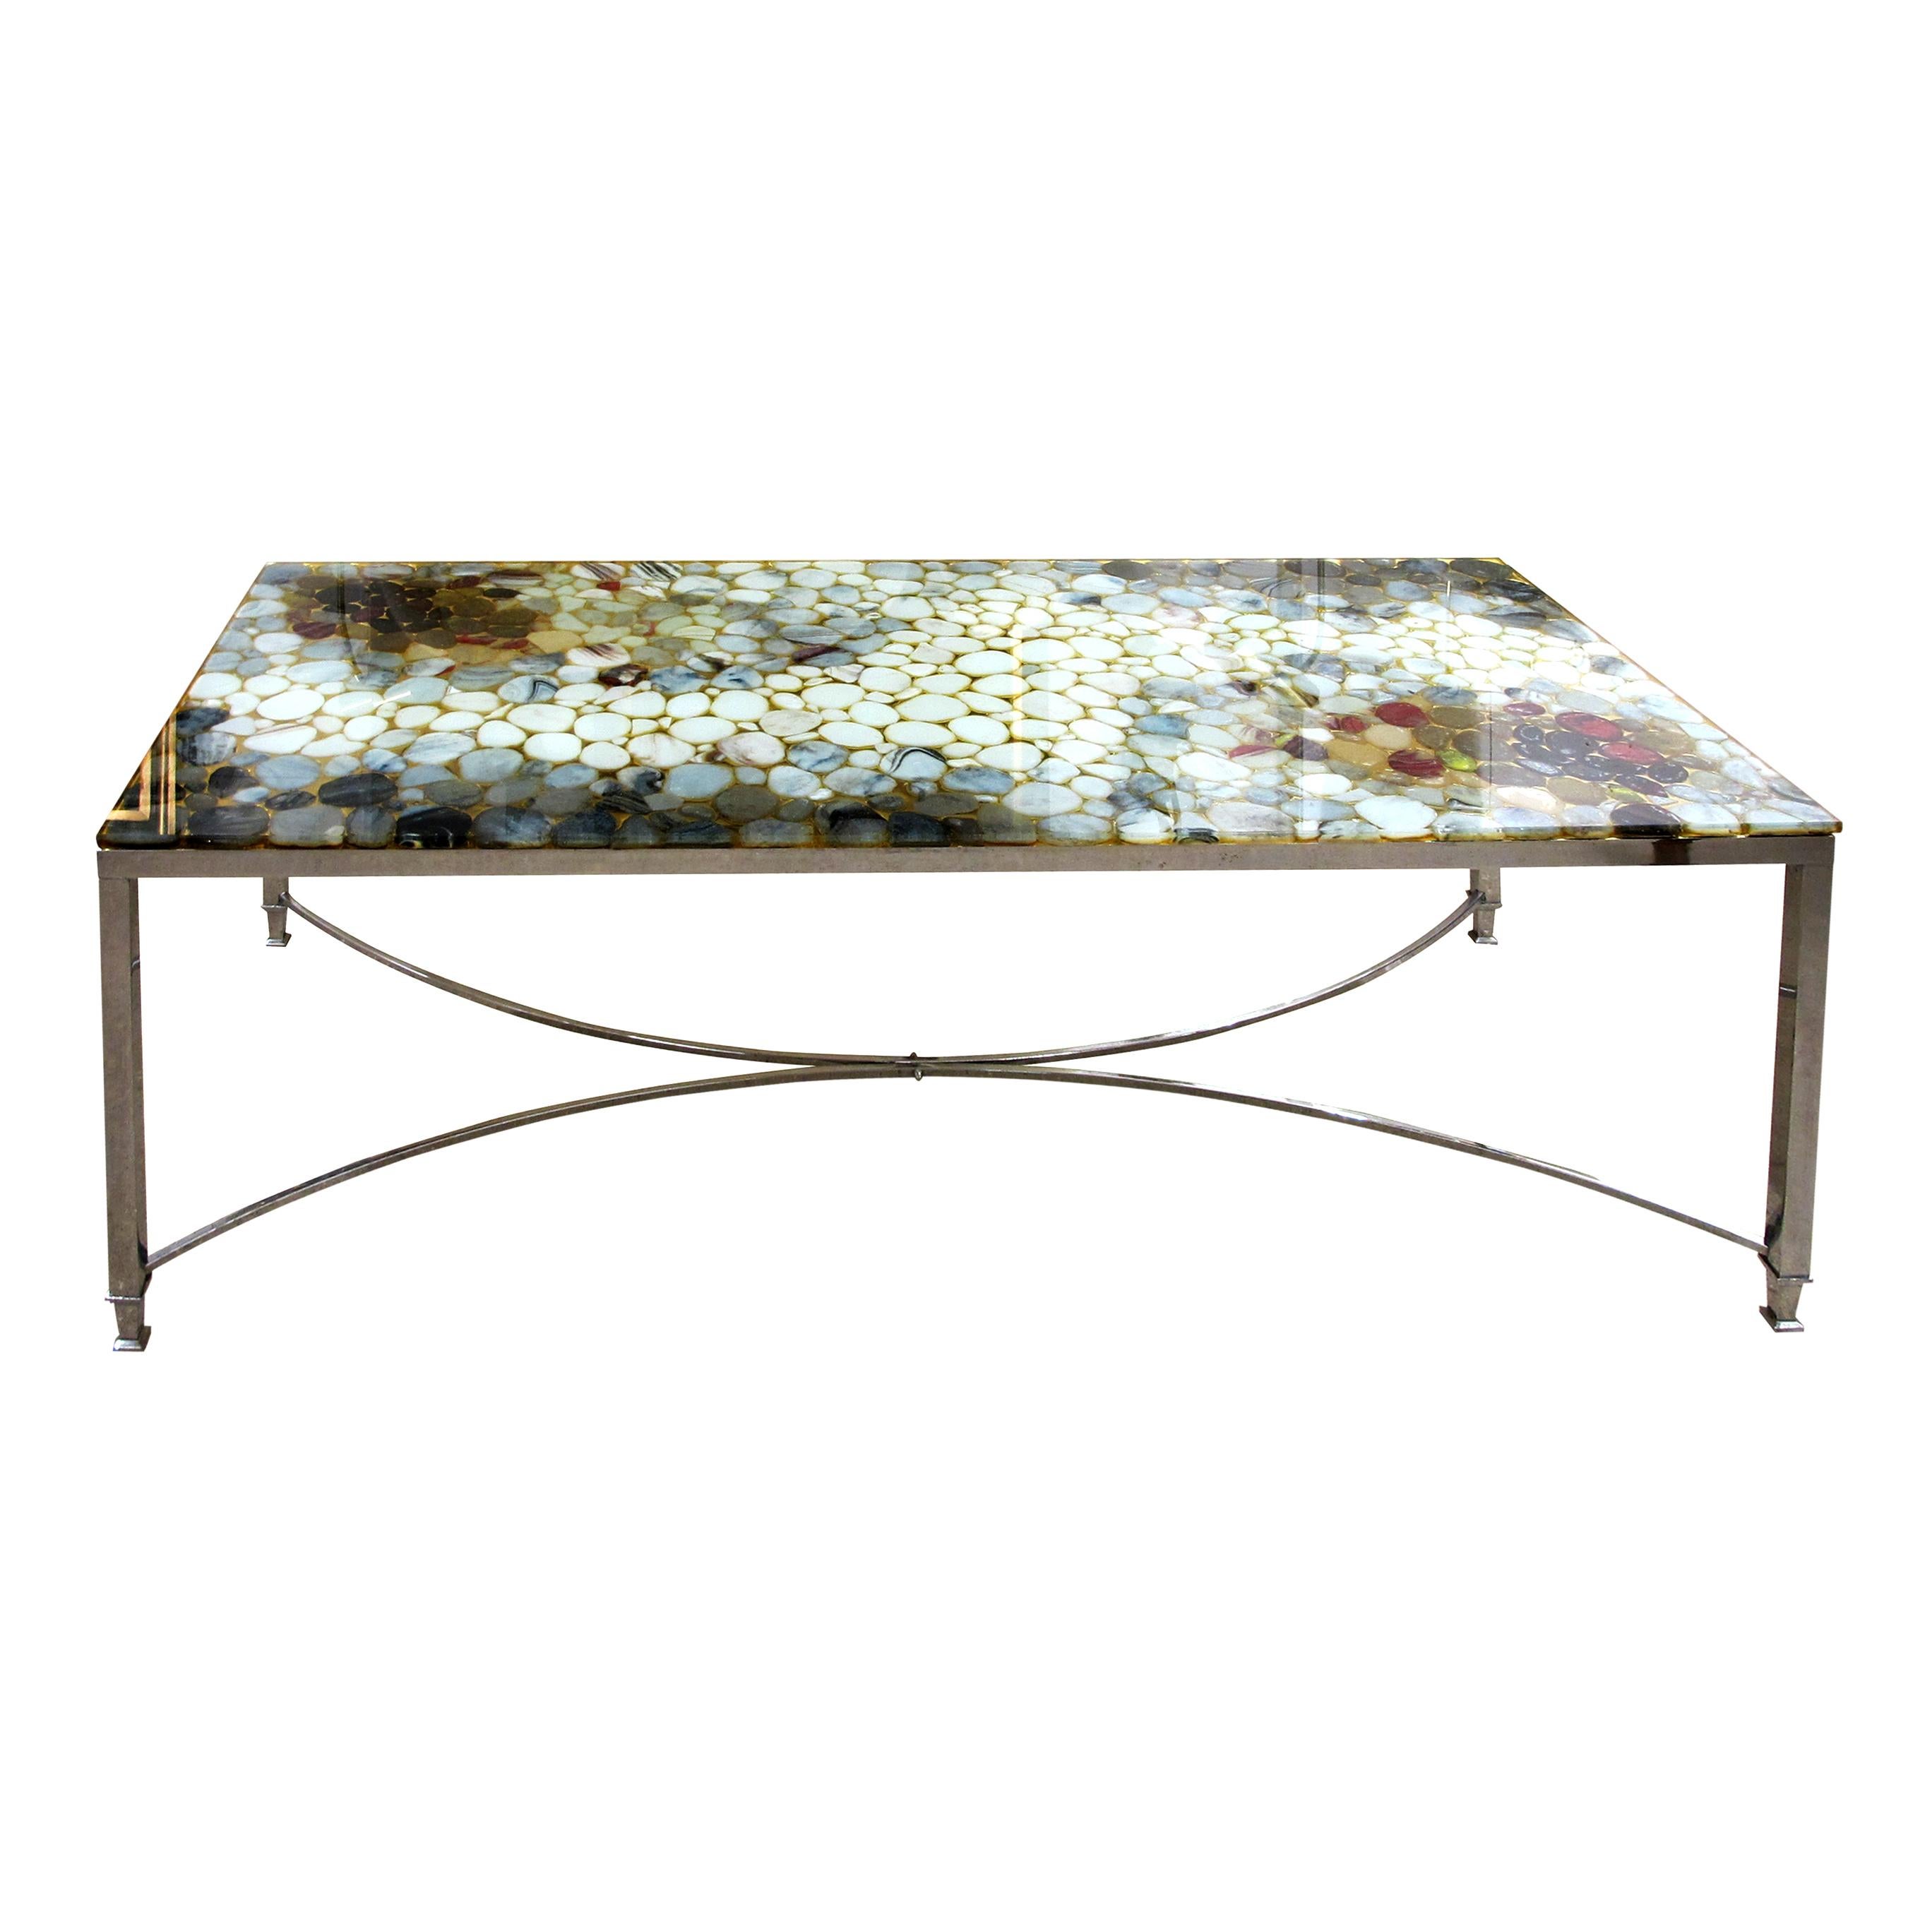 Metal 1970s Coffee Table With Natural Stone and Acrylic Top, Danish For Sale